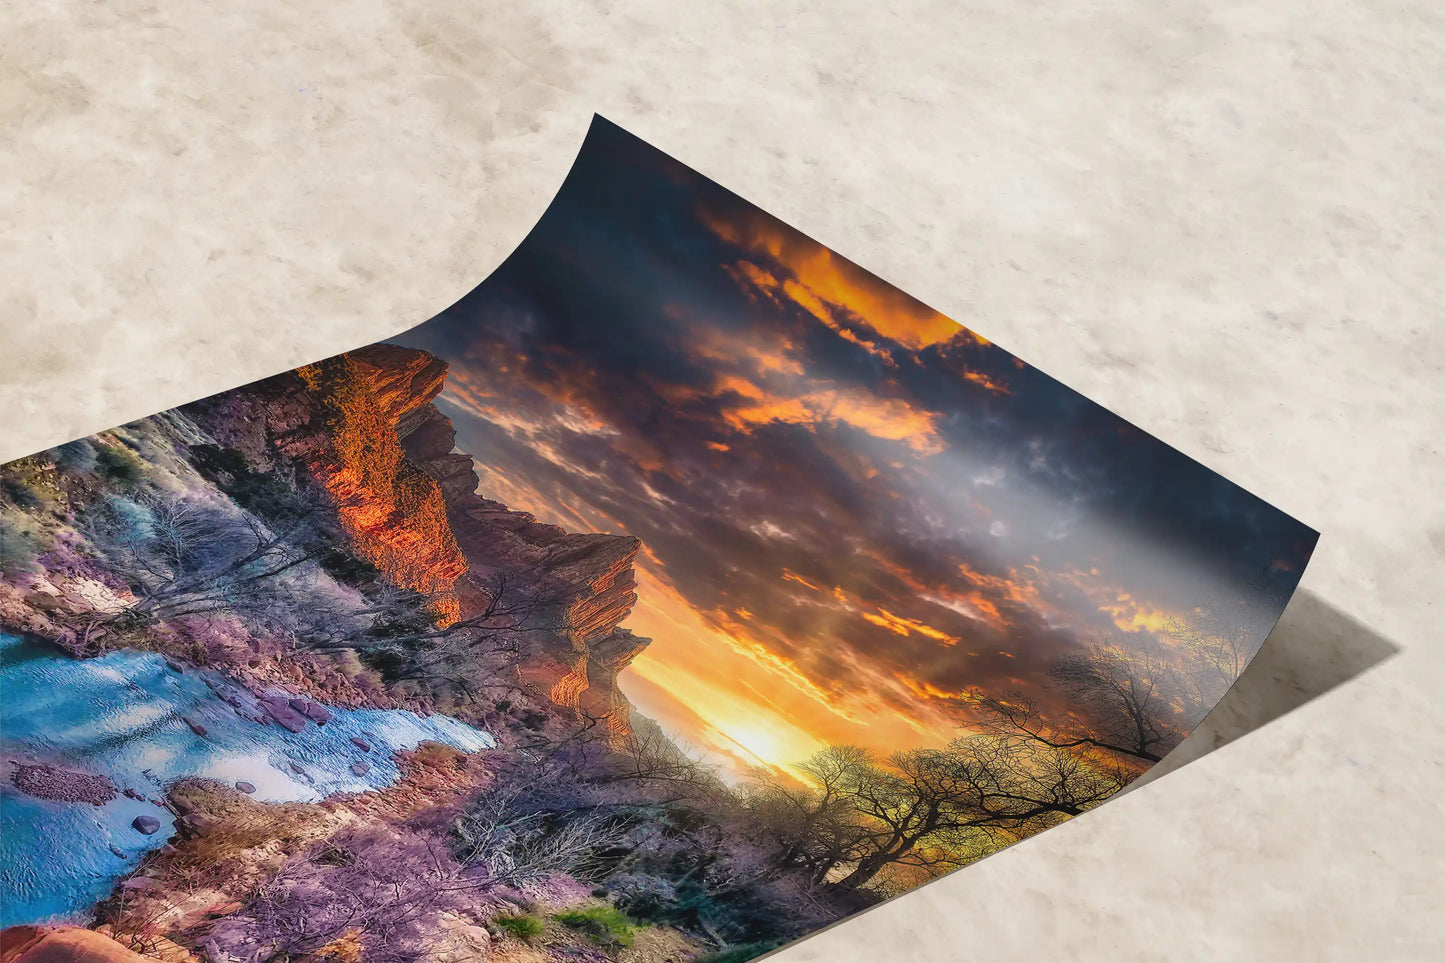 Curved paper print capturing Zion National Park's Watchman Mountain at sunset, with vivid clouds above and a serene river below.